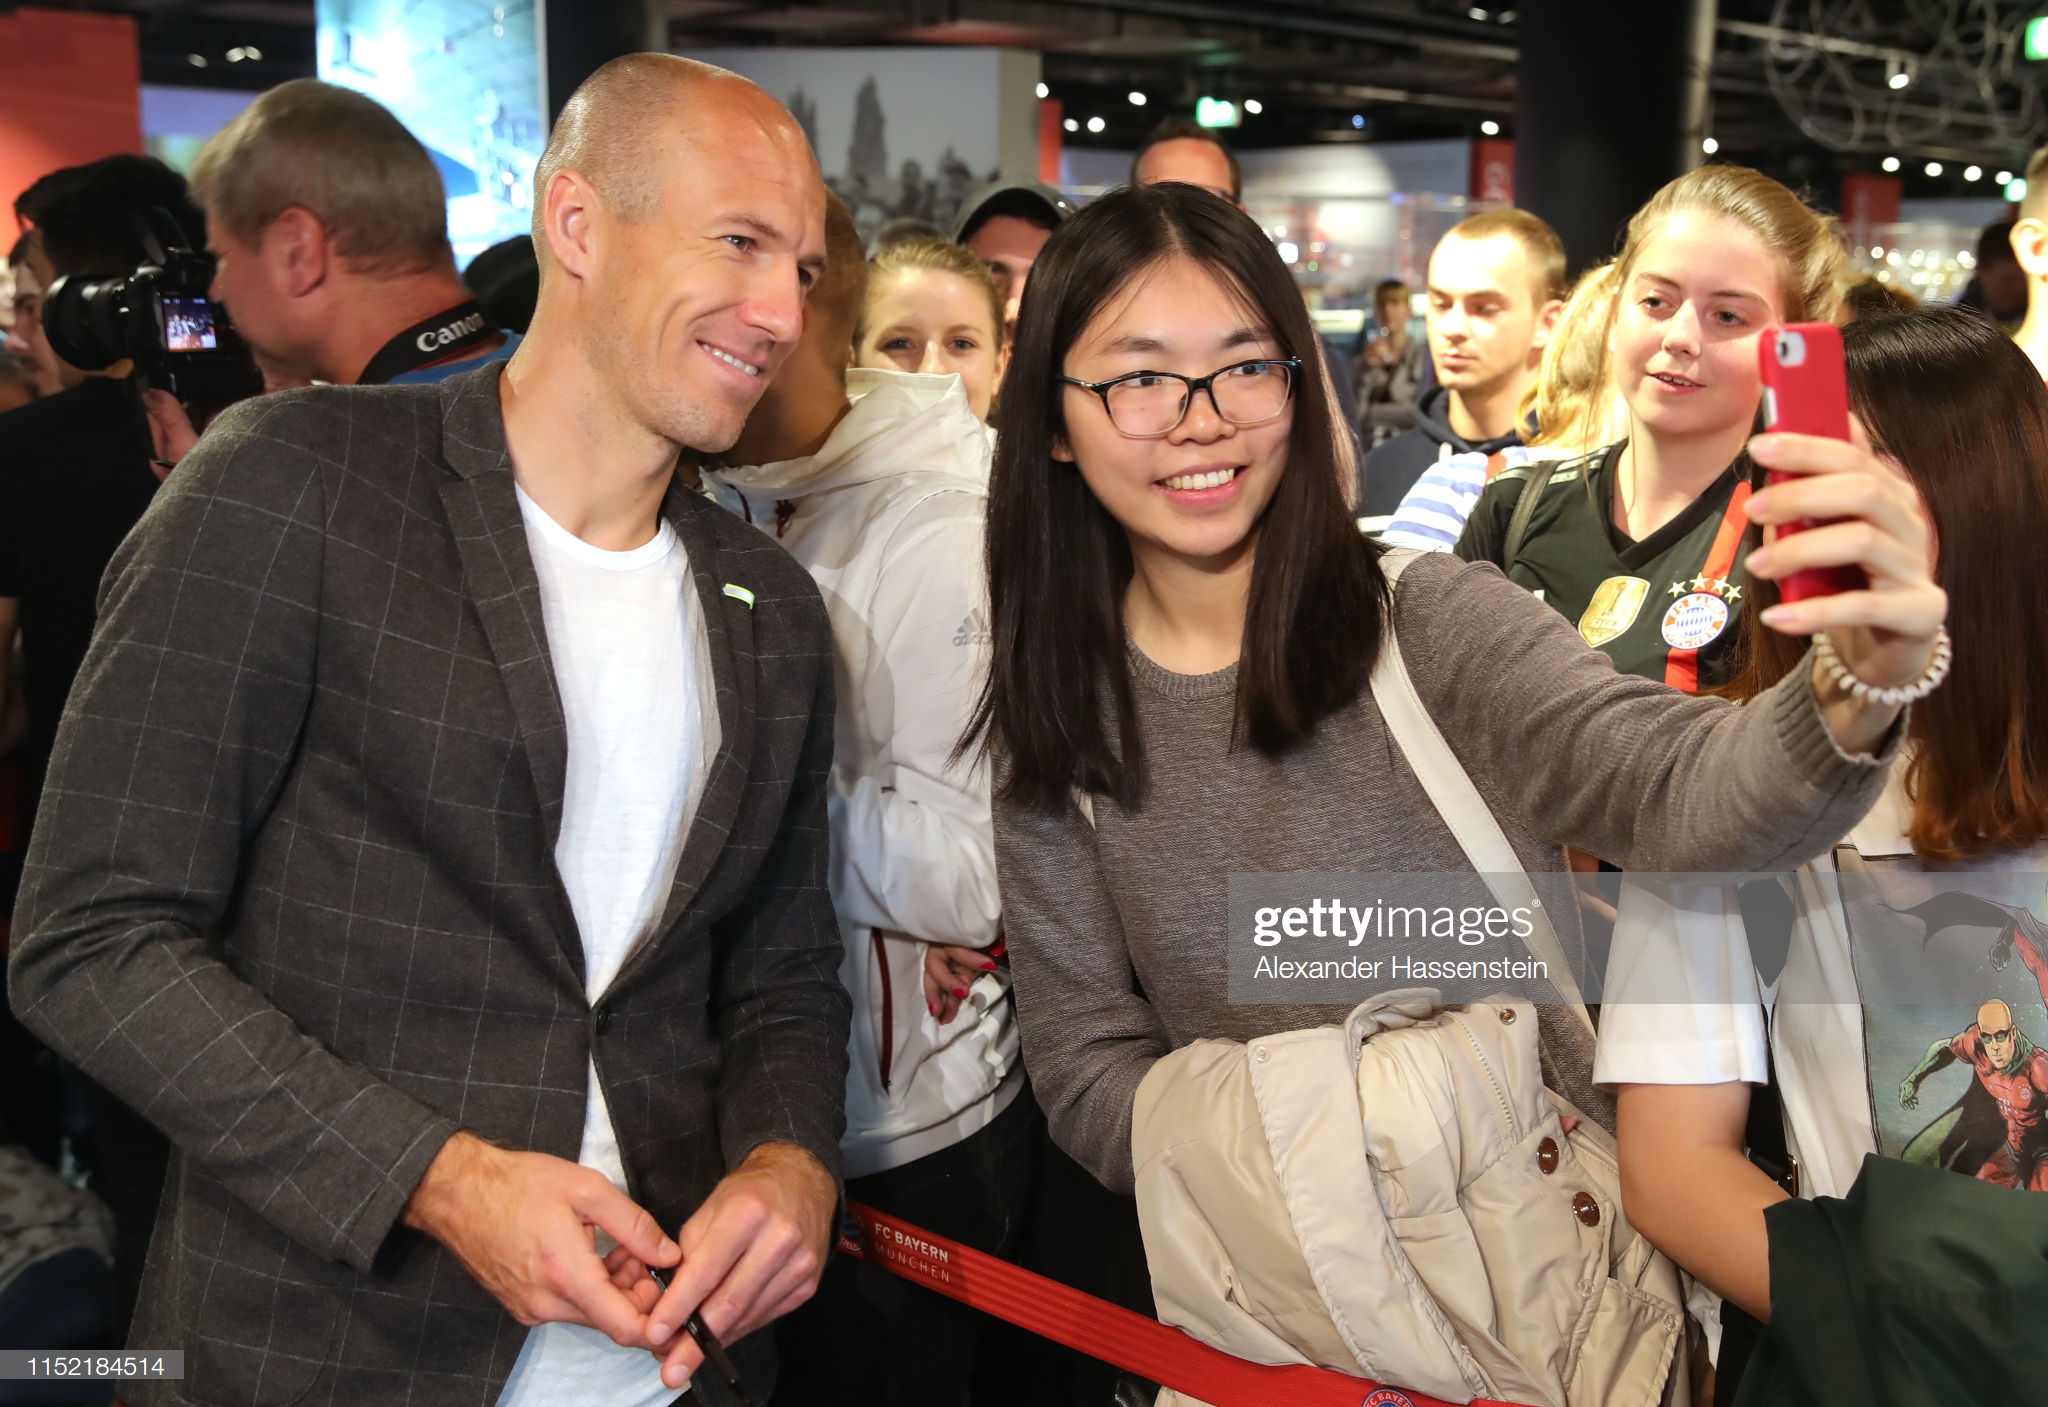 gettyimages-1152184514-2048x2048.jpg